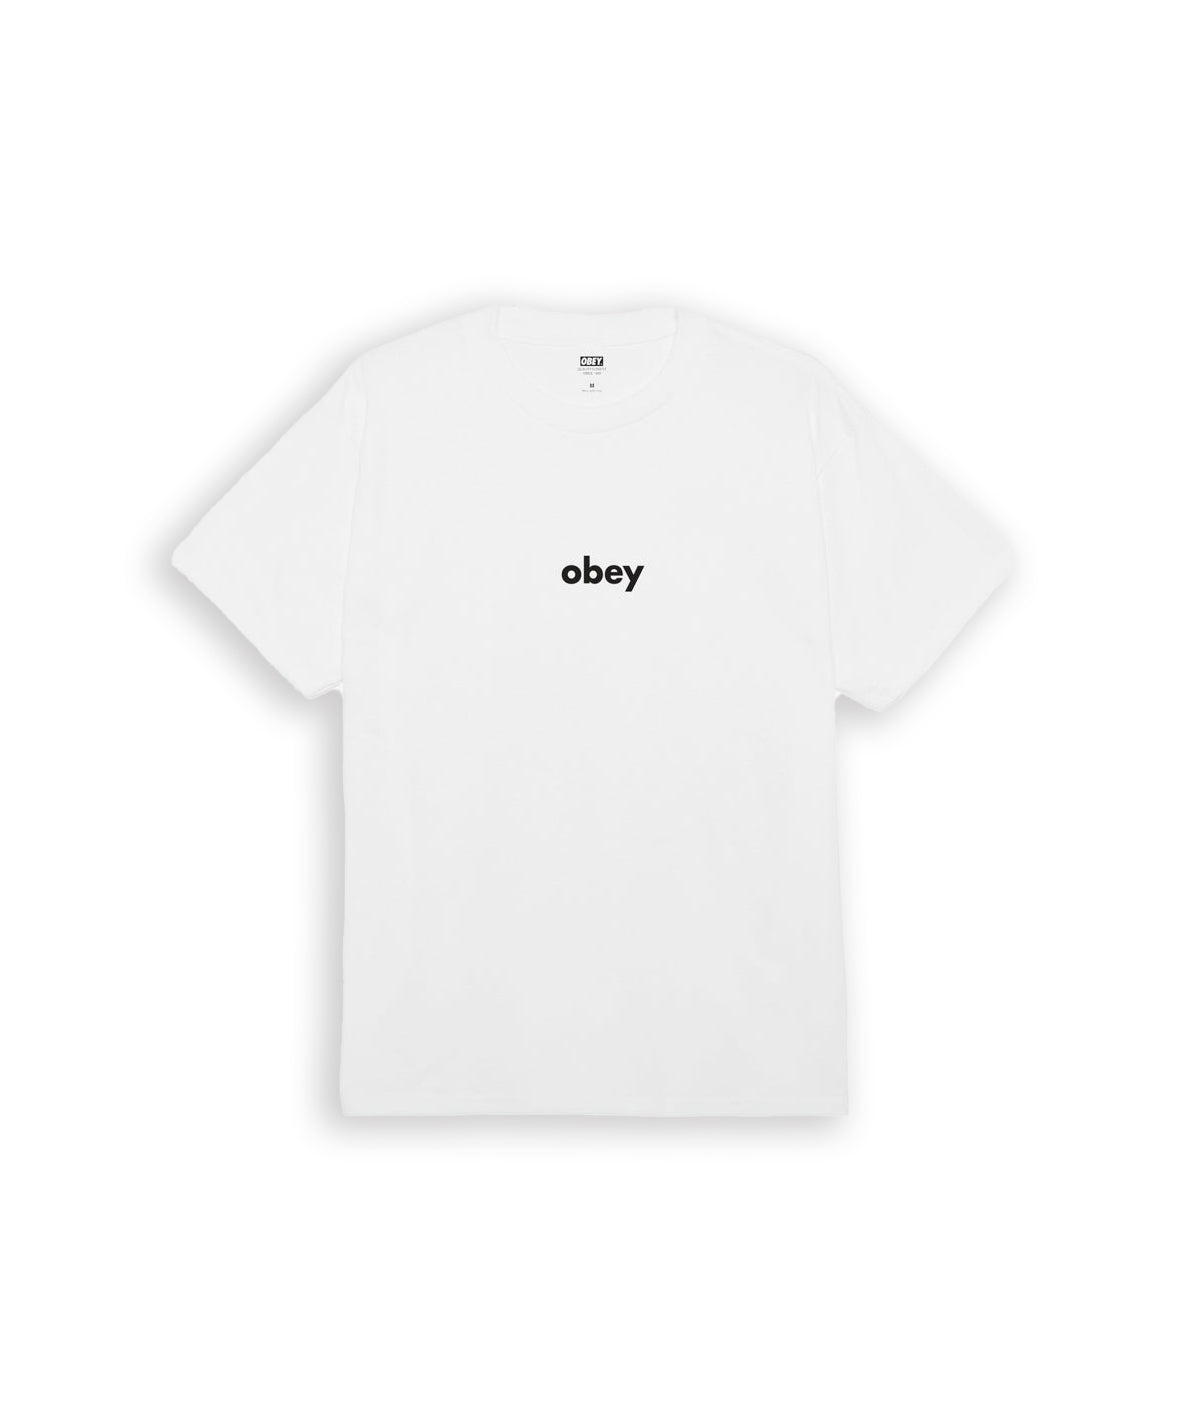 Obey Lower Case 2 T-Shirt Bianca